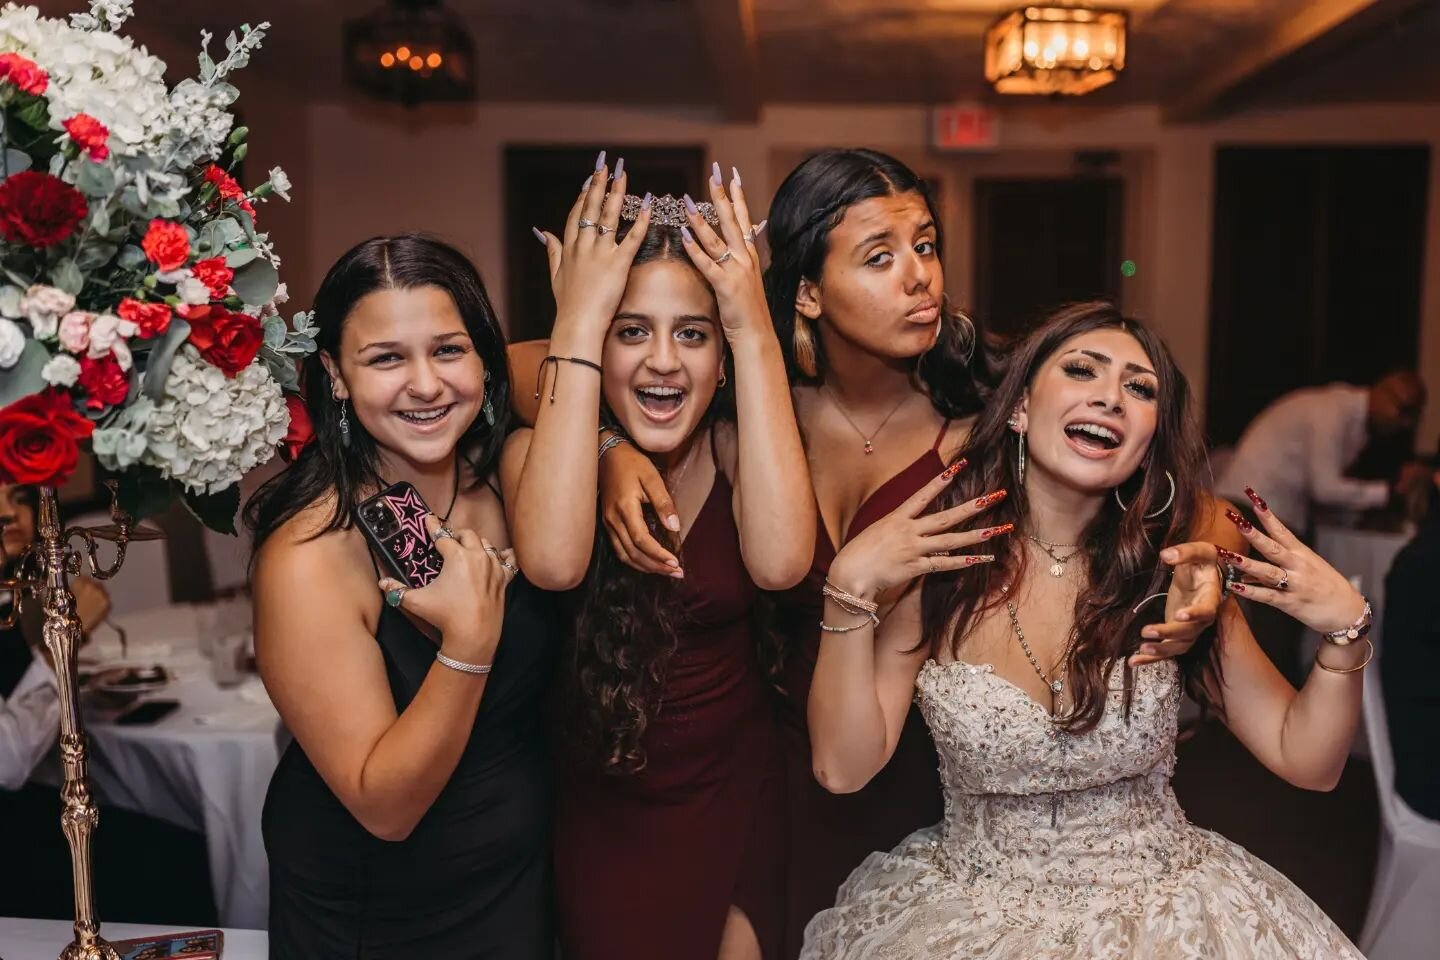 Tonight's Quince was so epic. I had a blast with Oliva and her family/ friends 
#quince #quincea&ntilde;era #sandiegophotographer #sandiegoquincea&ntilde;era #sandiegoquincea&ntilde;eras #sandiegoquincea&ntilde;eraphotographer #sandiego #sandiegoeven